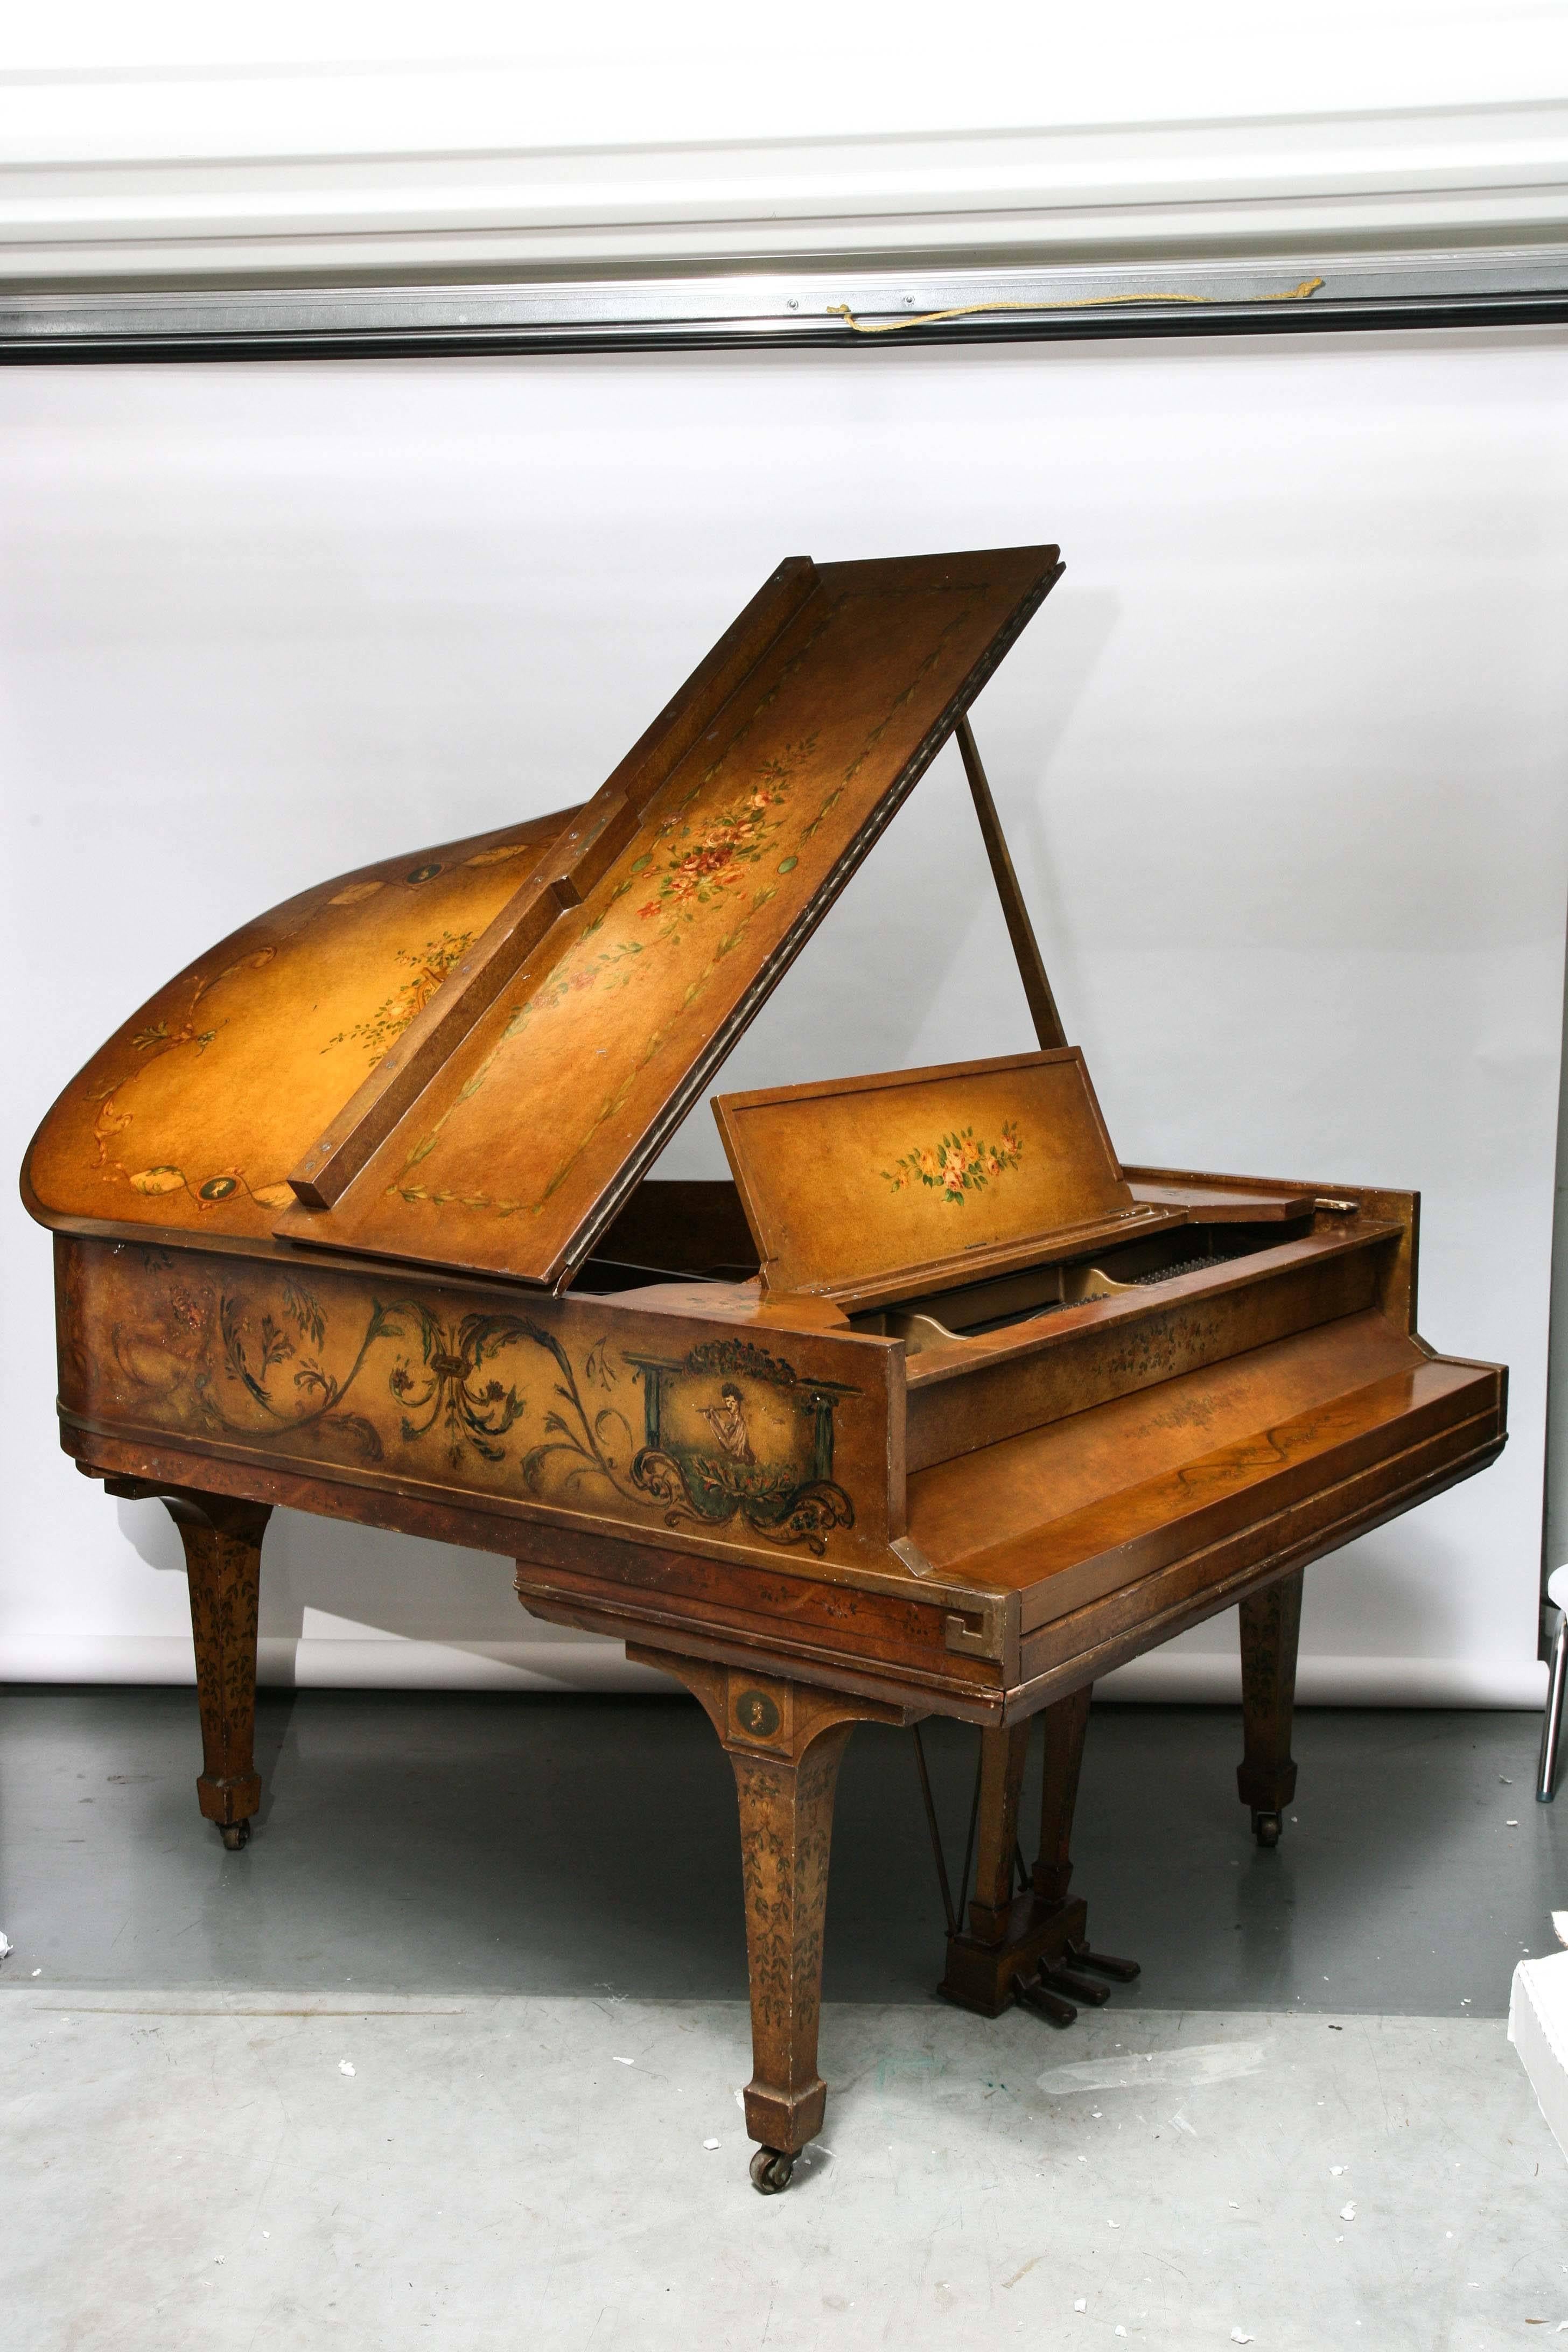 This is a very nice hand-painted baby grand piano made by Sohmer, NY. From a Boca Raton Florida estate.
Its a great looking piano. The paintwork is very good, has wear in some parts. It plays well, but I would say needs tuning once moved, also has